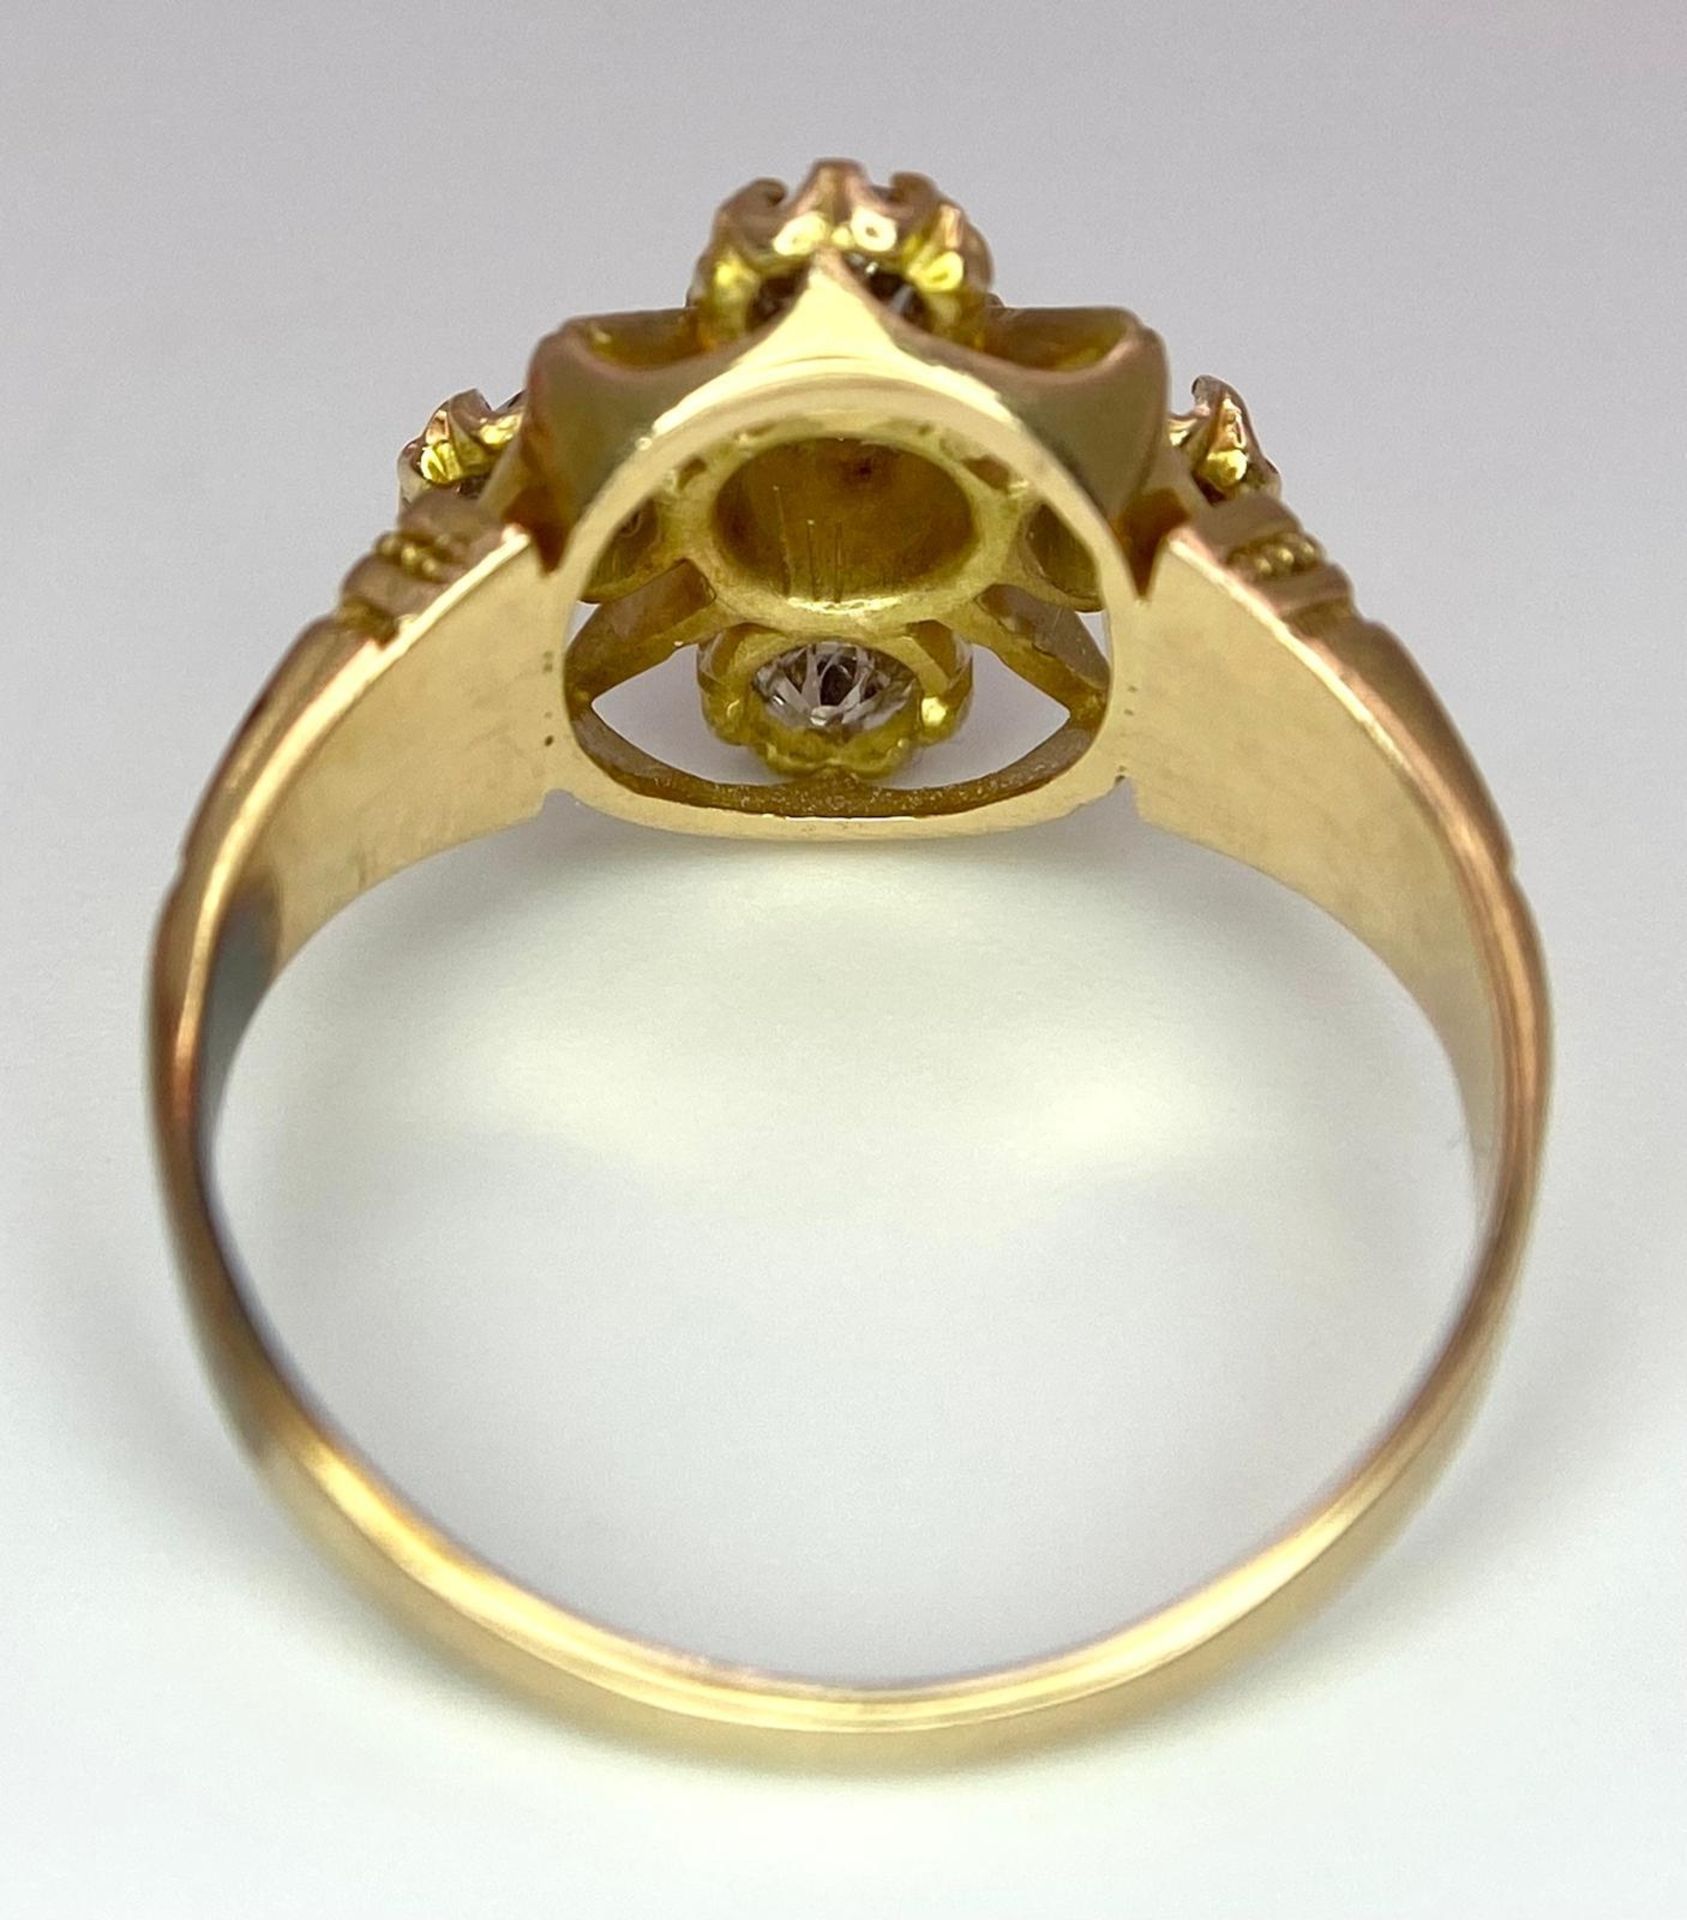 A 9K Yellow Gold (tested) Diamond Ring. Five round cut diamonds on a raised setting. Size N. 4.32g - Image 5 of 5